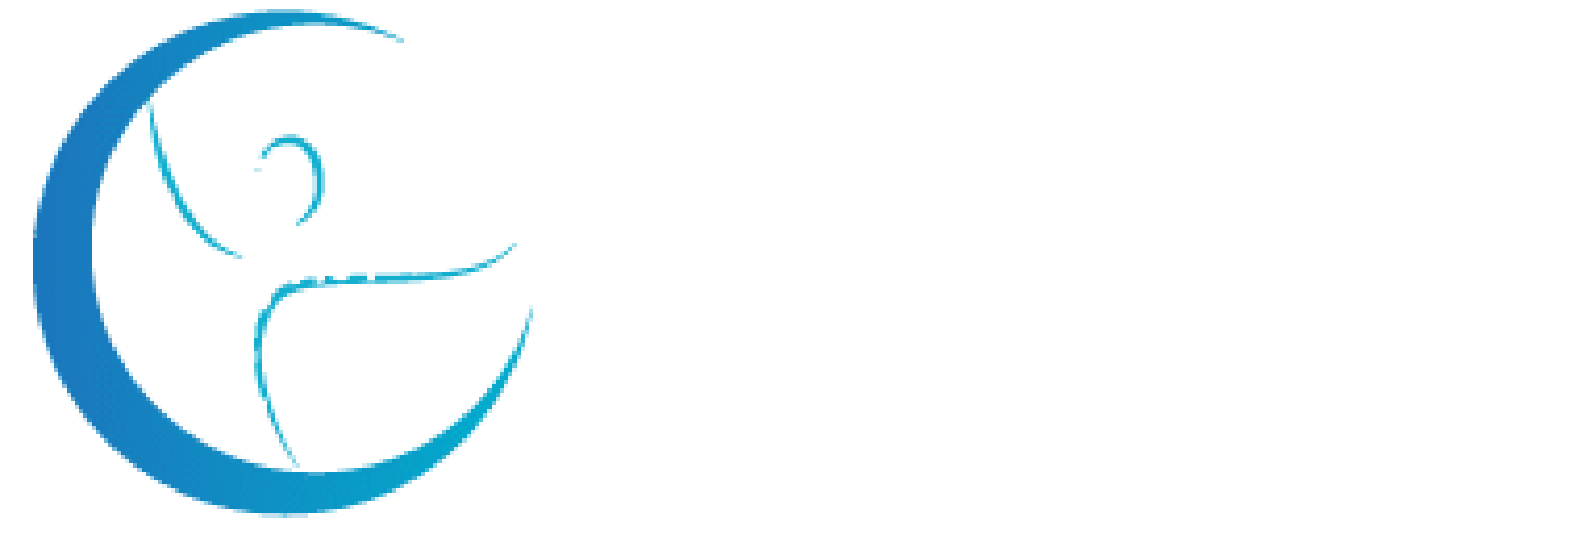 Physiotherapy in Richmond Hill, ON | Awesome Physiotherapy | Clinic